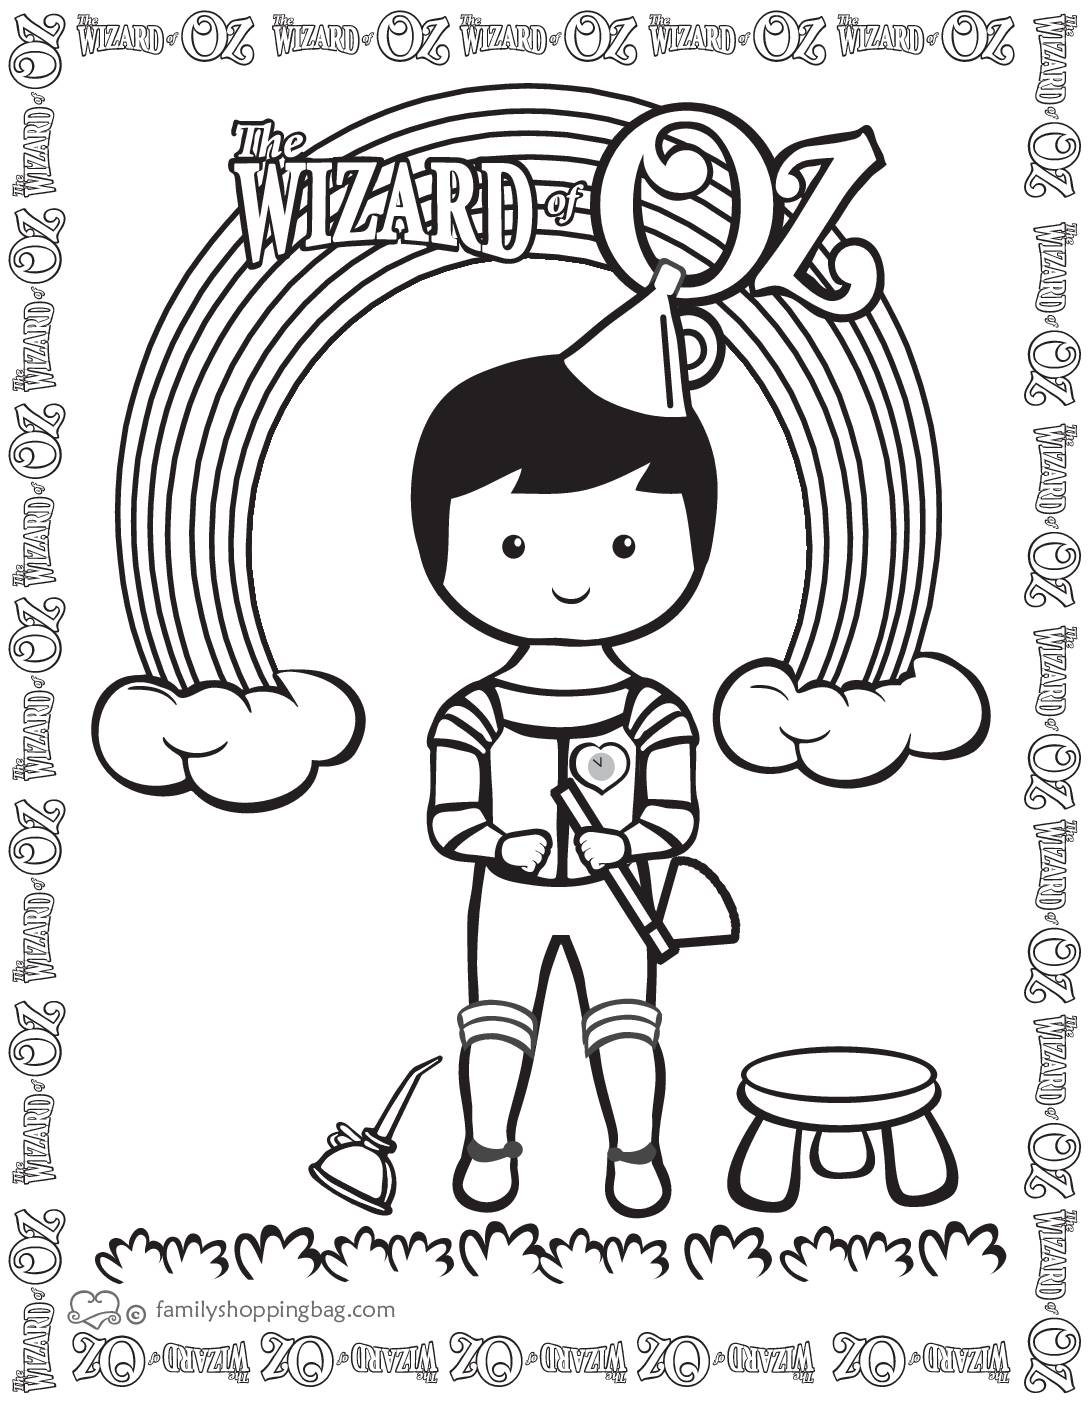 Coloring Page  Wizard of Oz  pdf